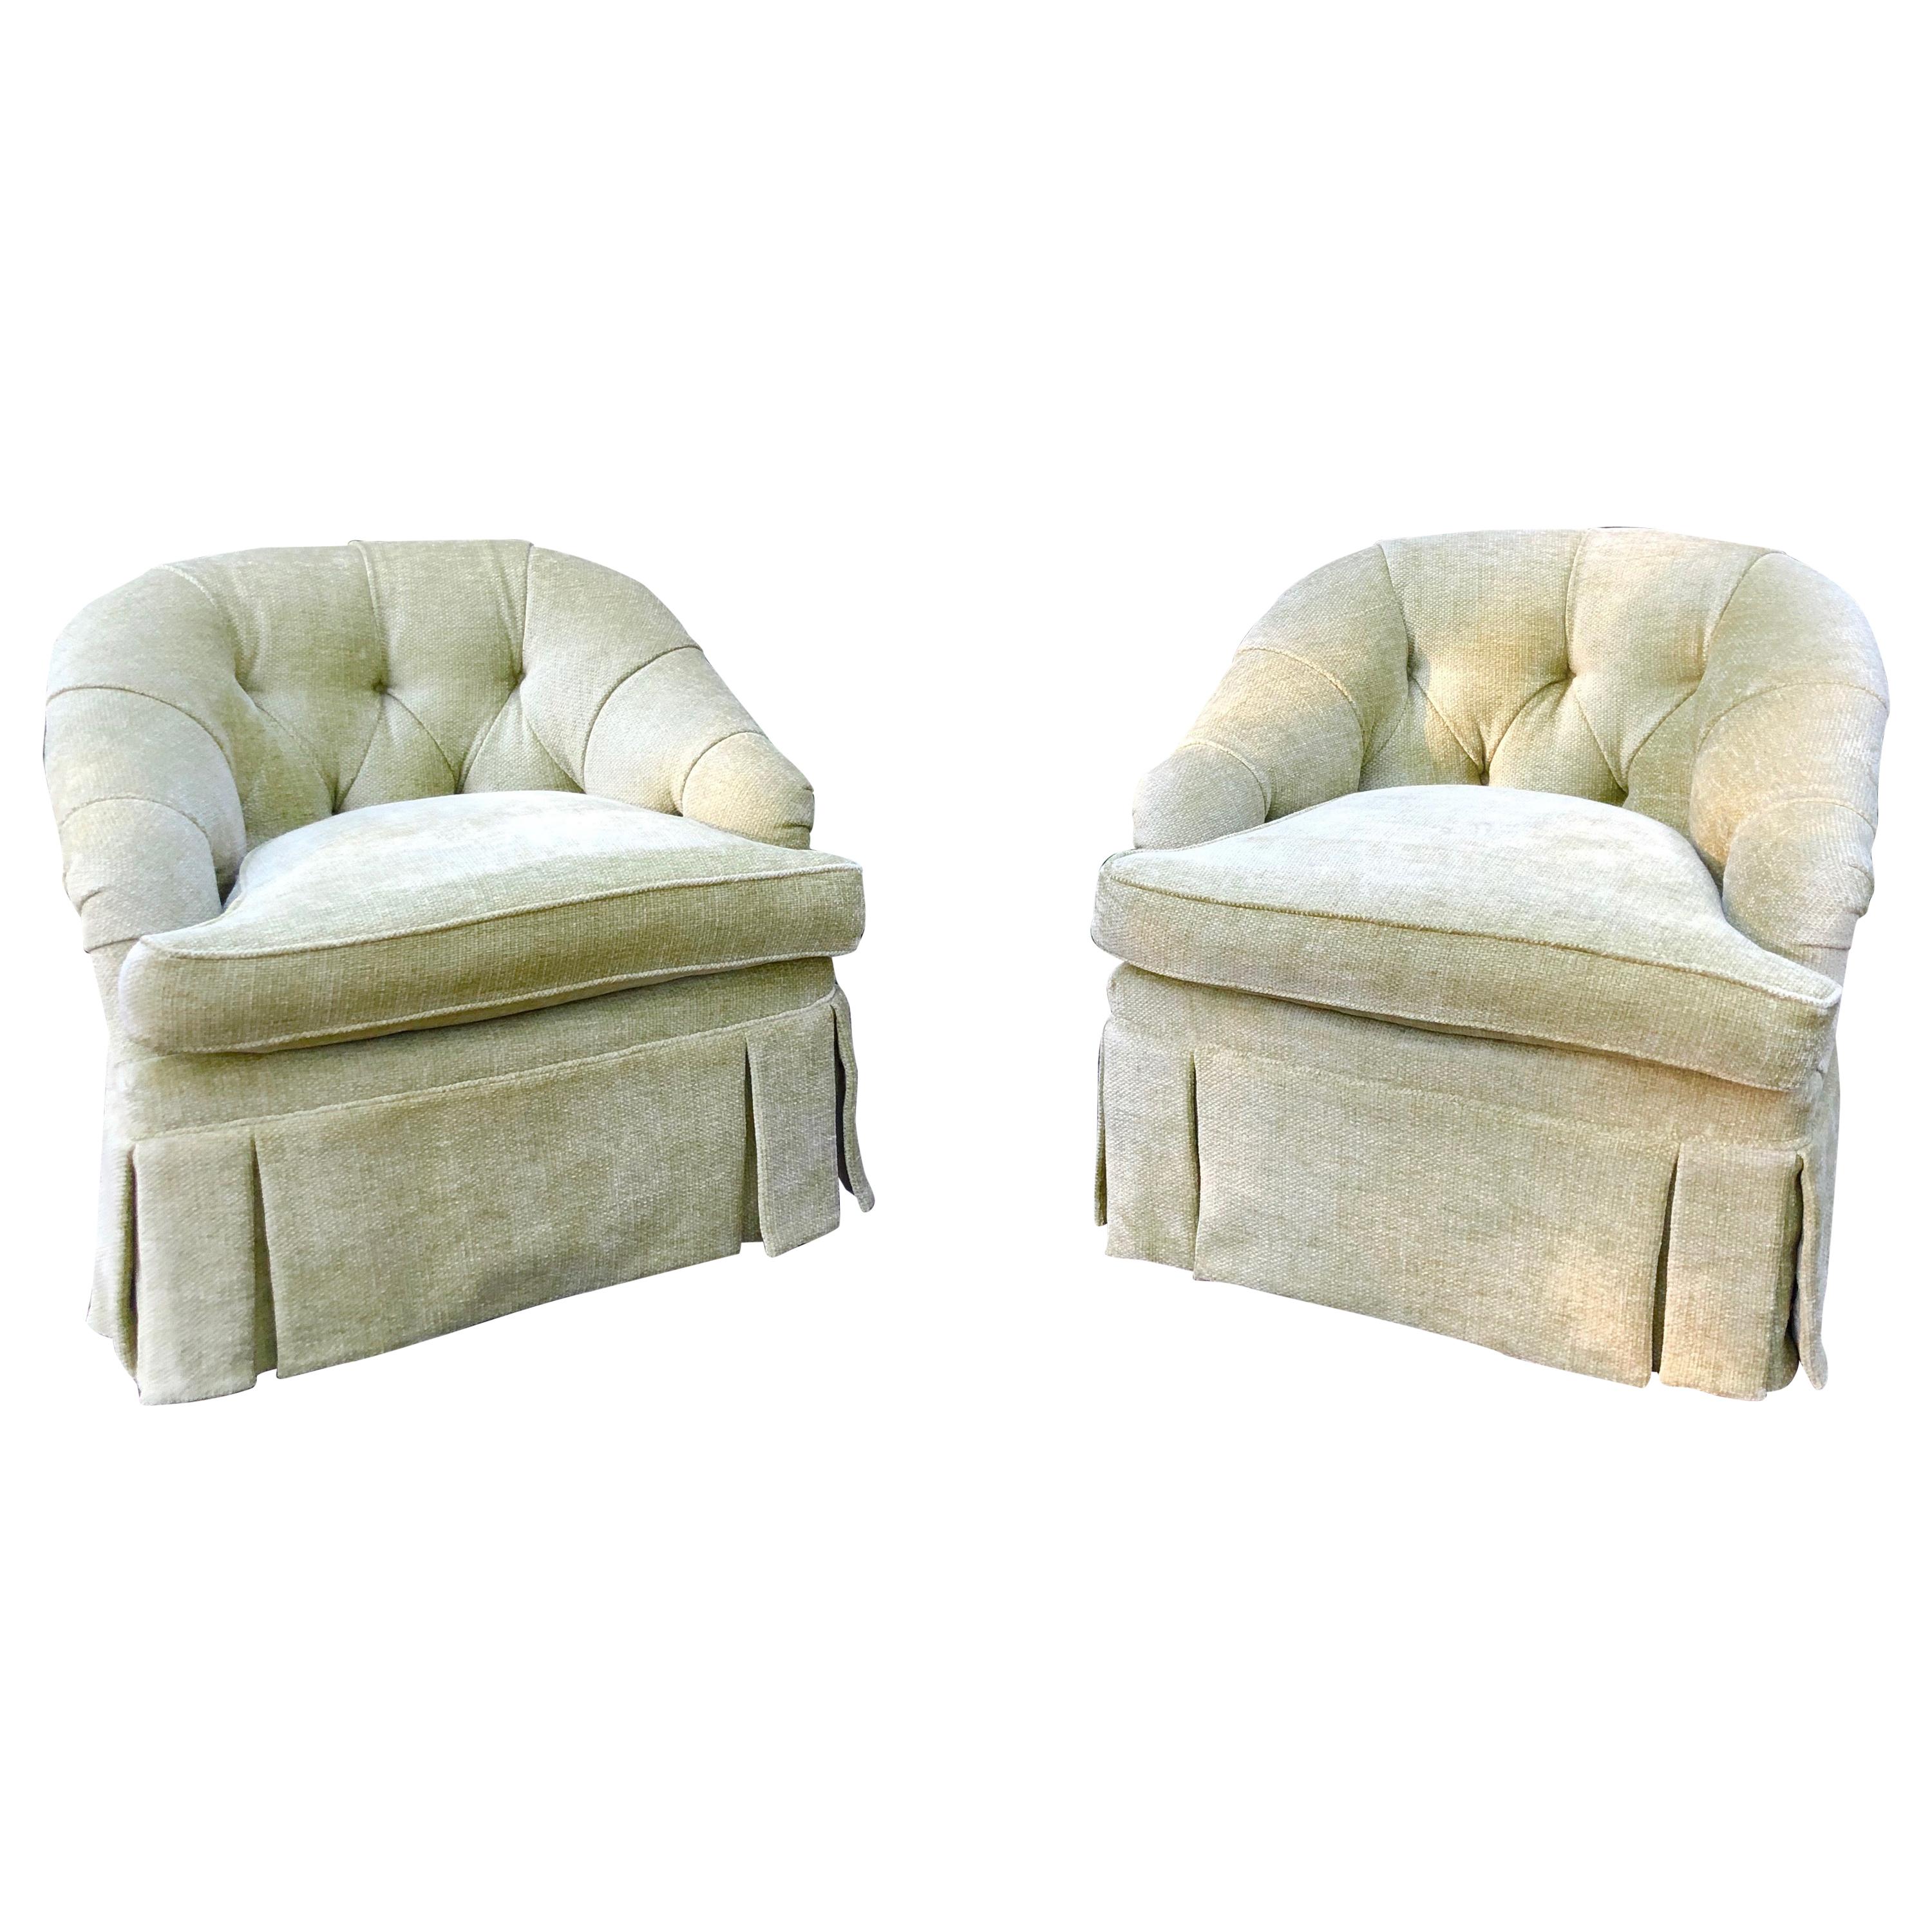 Luscious Pair of Vintage Pale Green Chenille Club Chairs